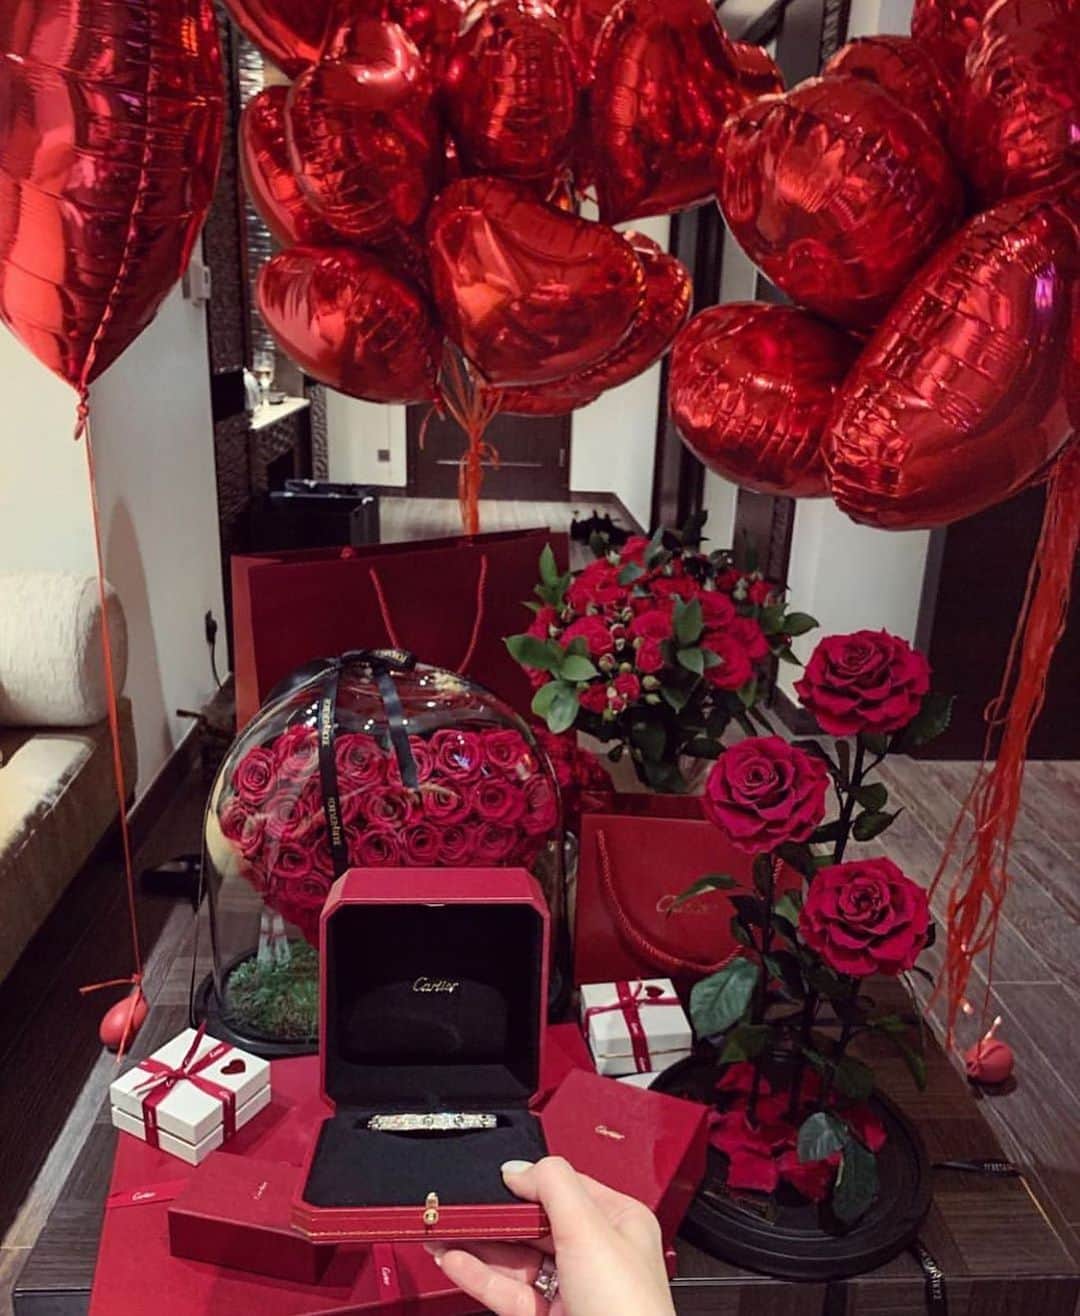 BeStylishのインスタグラム：「Surprise goals 🌹 . . 👉🏻 Follow @bestylish for more daily content 👉🏻 Follow @bestylish for more daily content 💎 Credit to: @love__rose92 . . #goals #cute #relationshipgoals #propose #romantic #valentinesday #roses #surprisegoals」